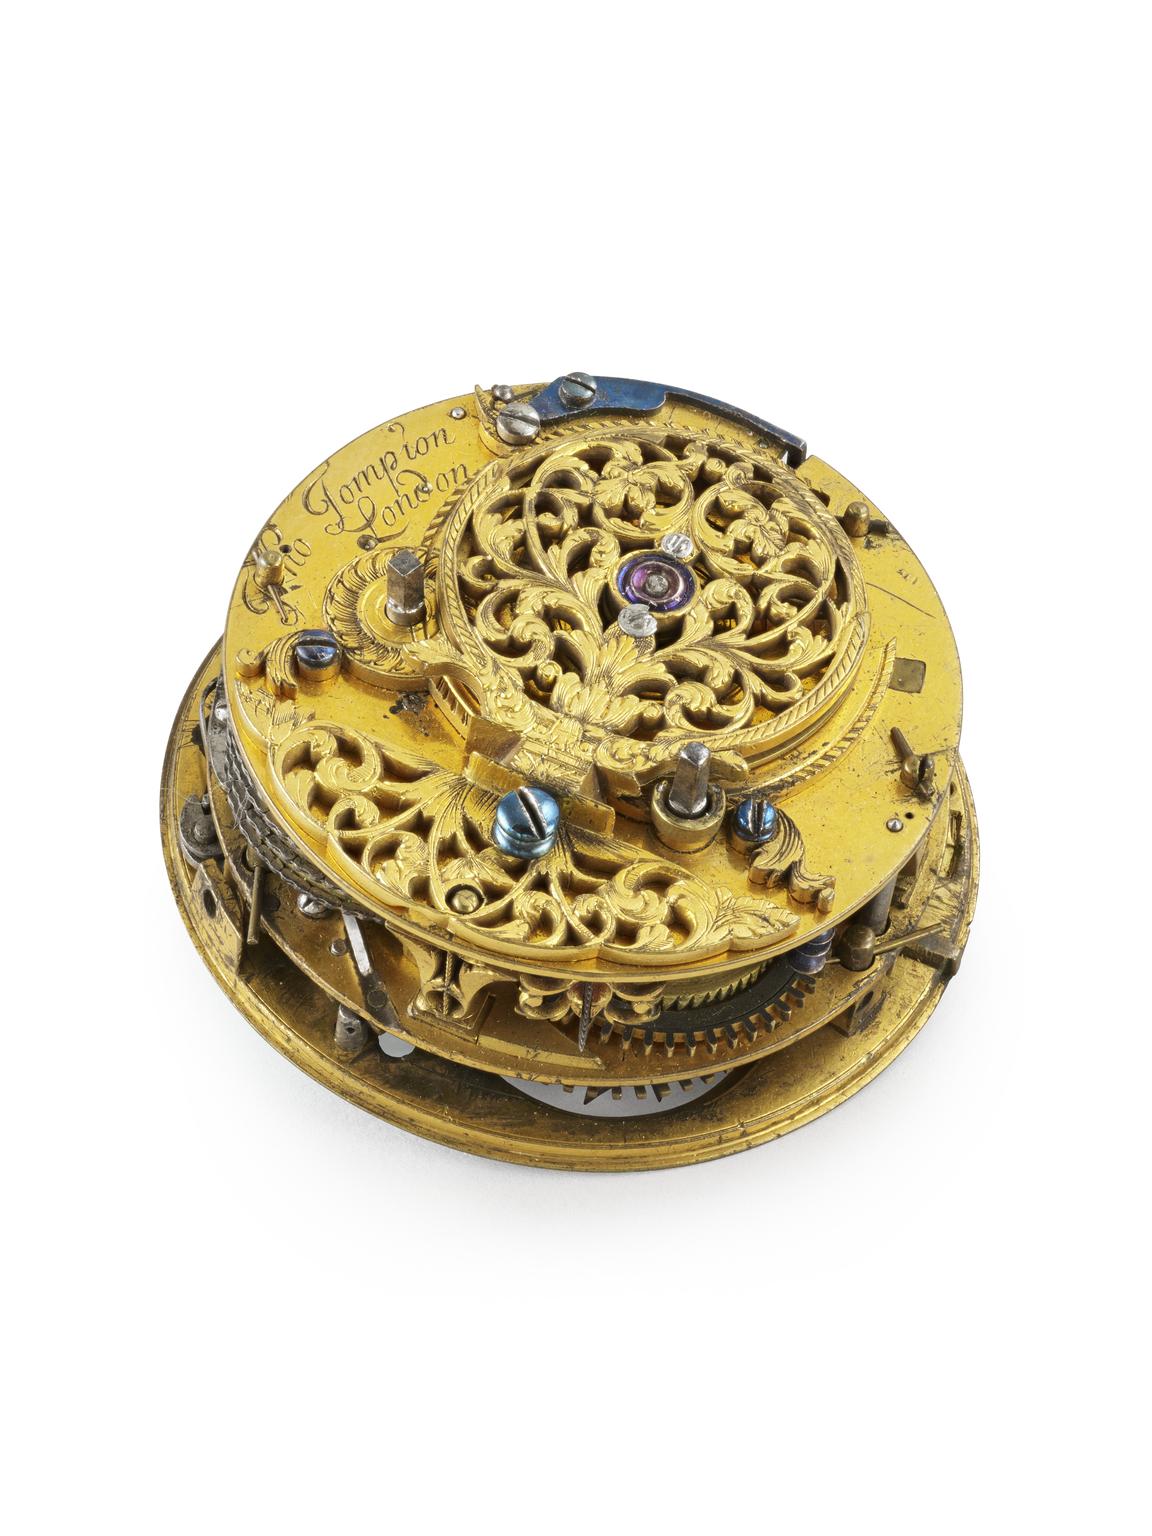 Watch movement with a quarter-repeating mechanism of early design by Thomas Tompion. (watch movement; verge escapement)